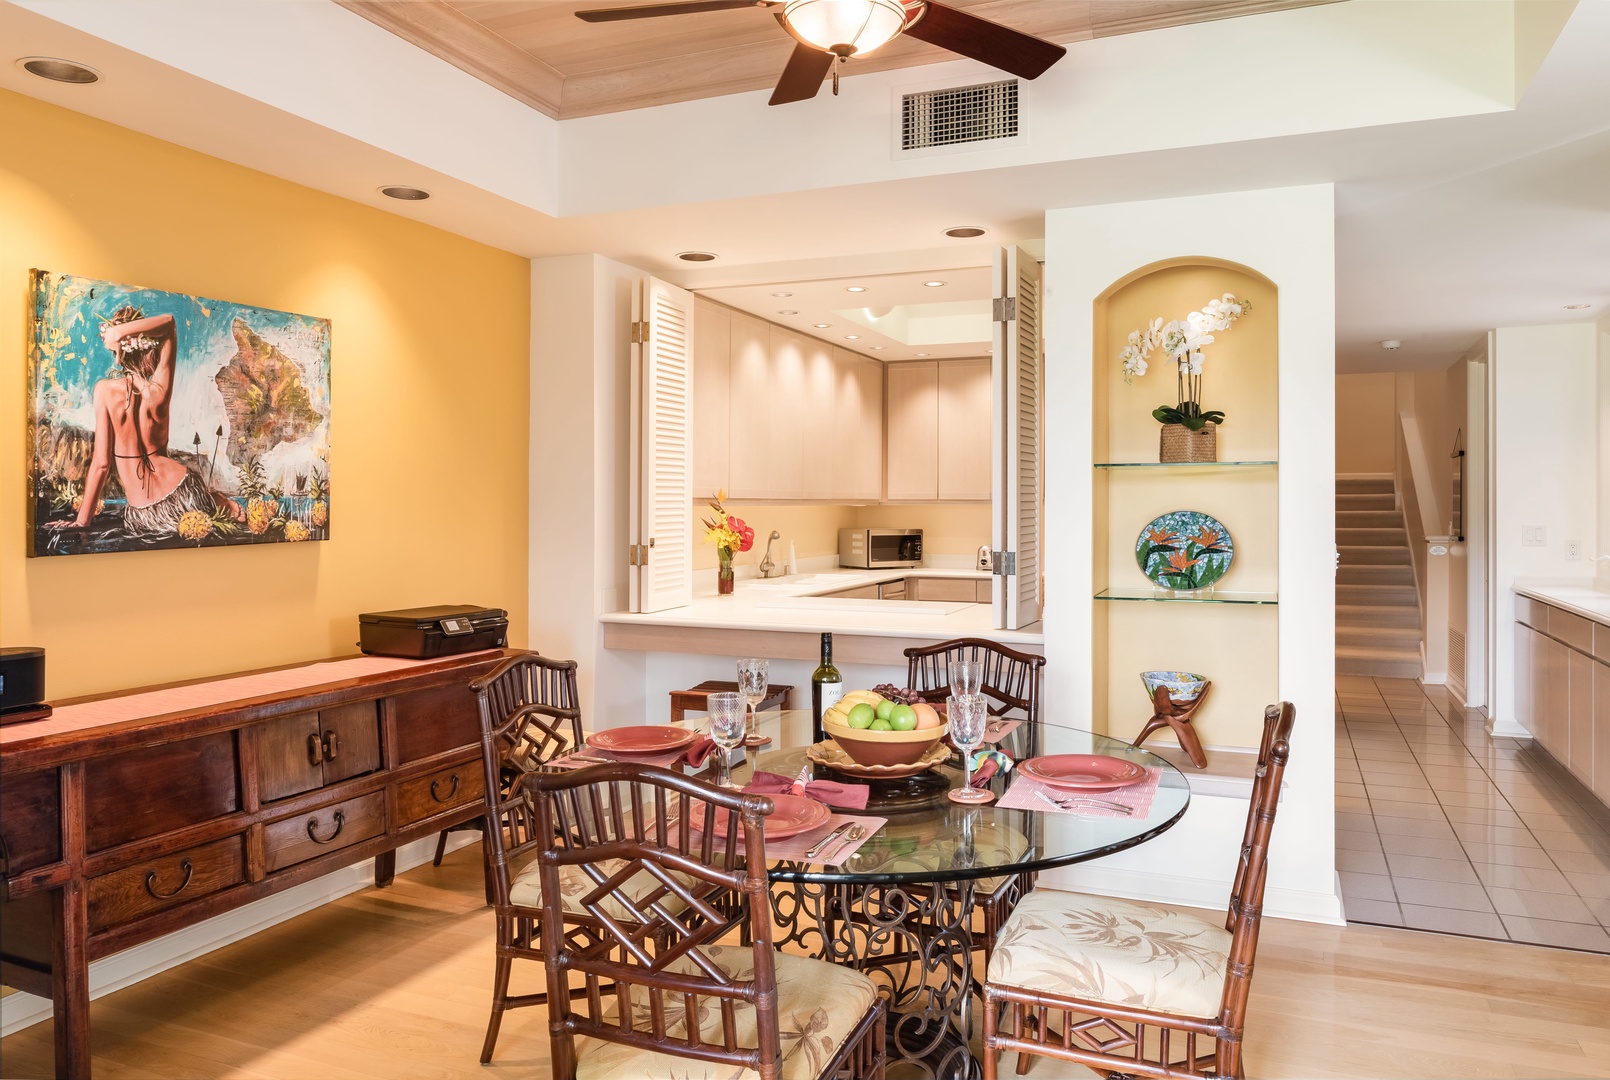 Kamuela Vacation Rentals, The Islands D3 - Dining Room w/ Additional Seating for Six Opens Into Kitchen via Breakfast Bar